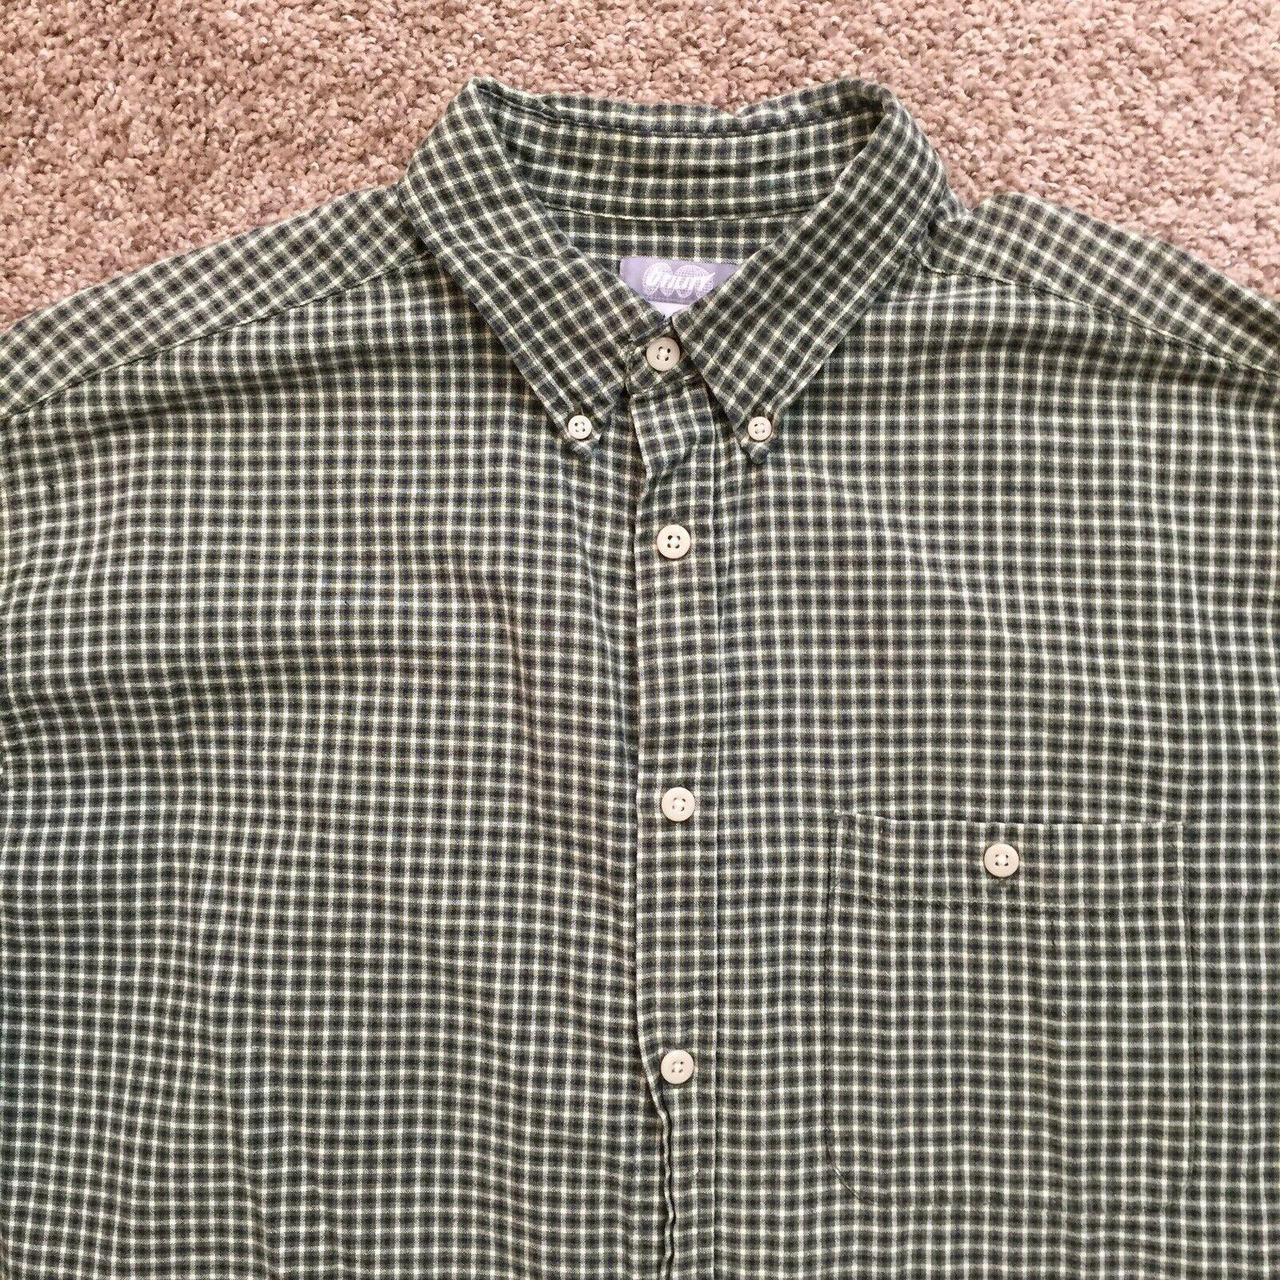 Product Image 3 - Utility Mens Large Green/White Check